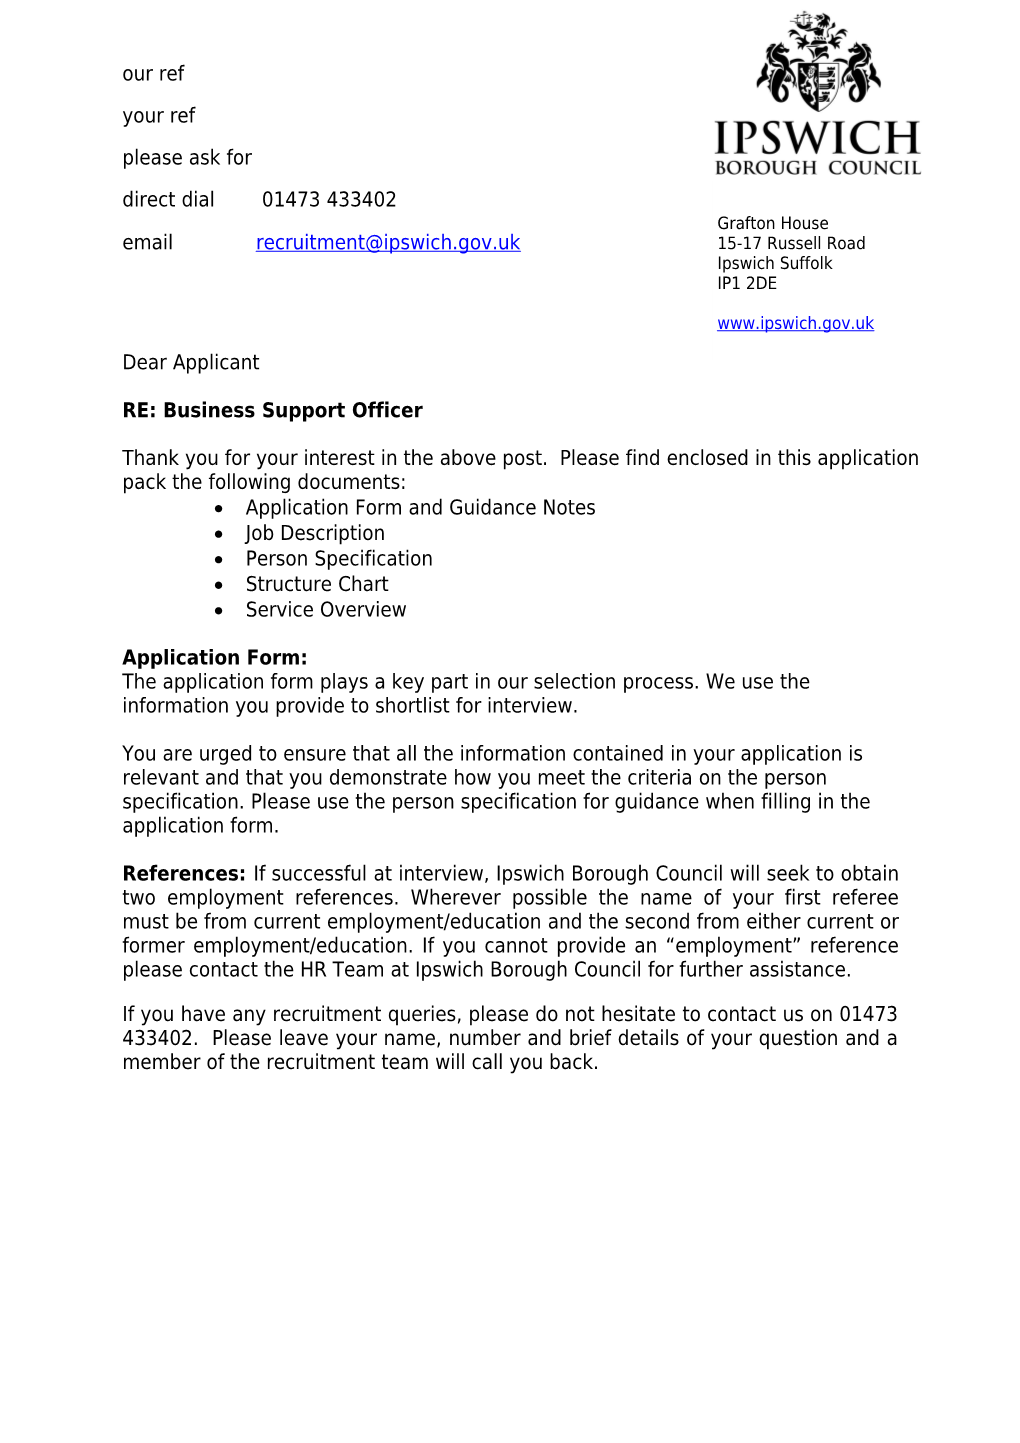 RE: Business Support Officer